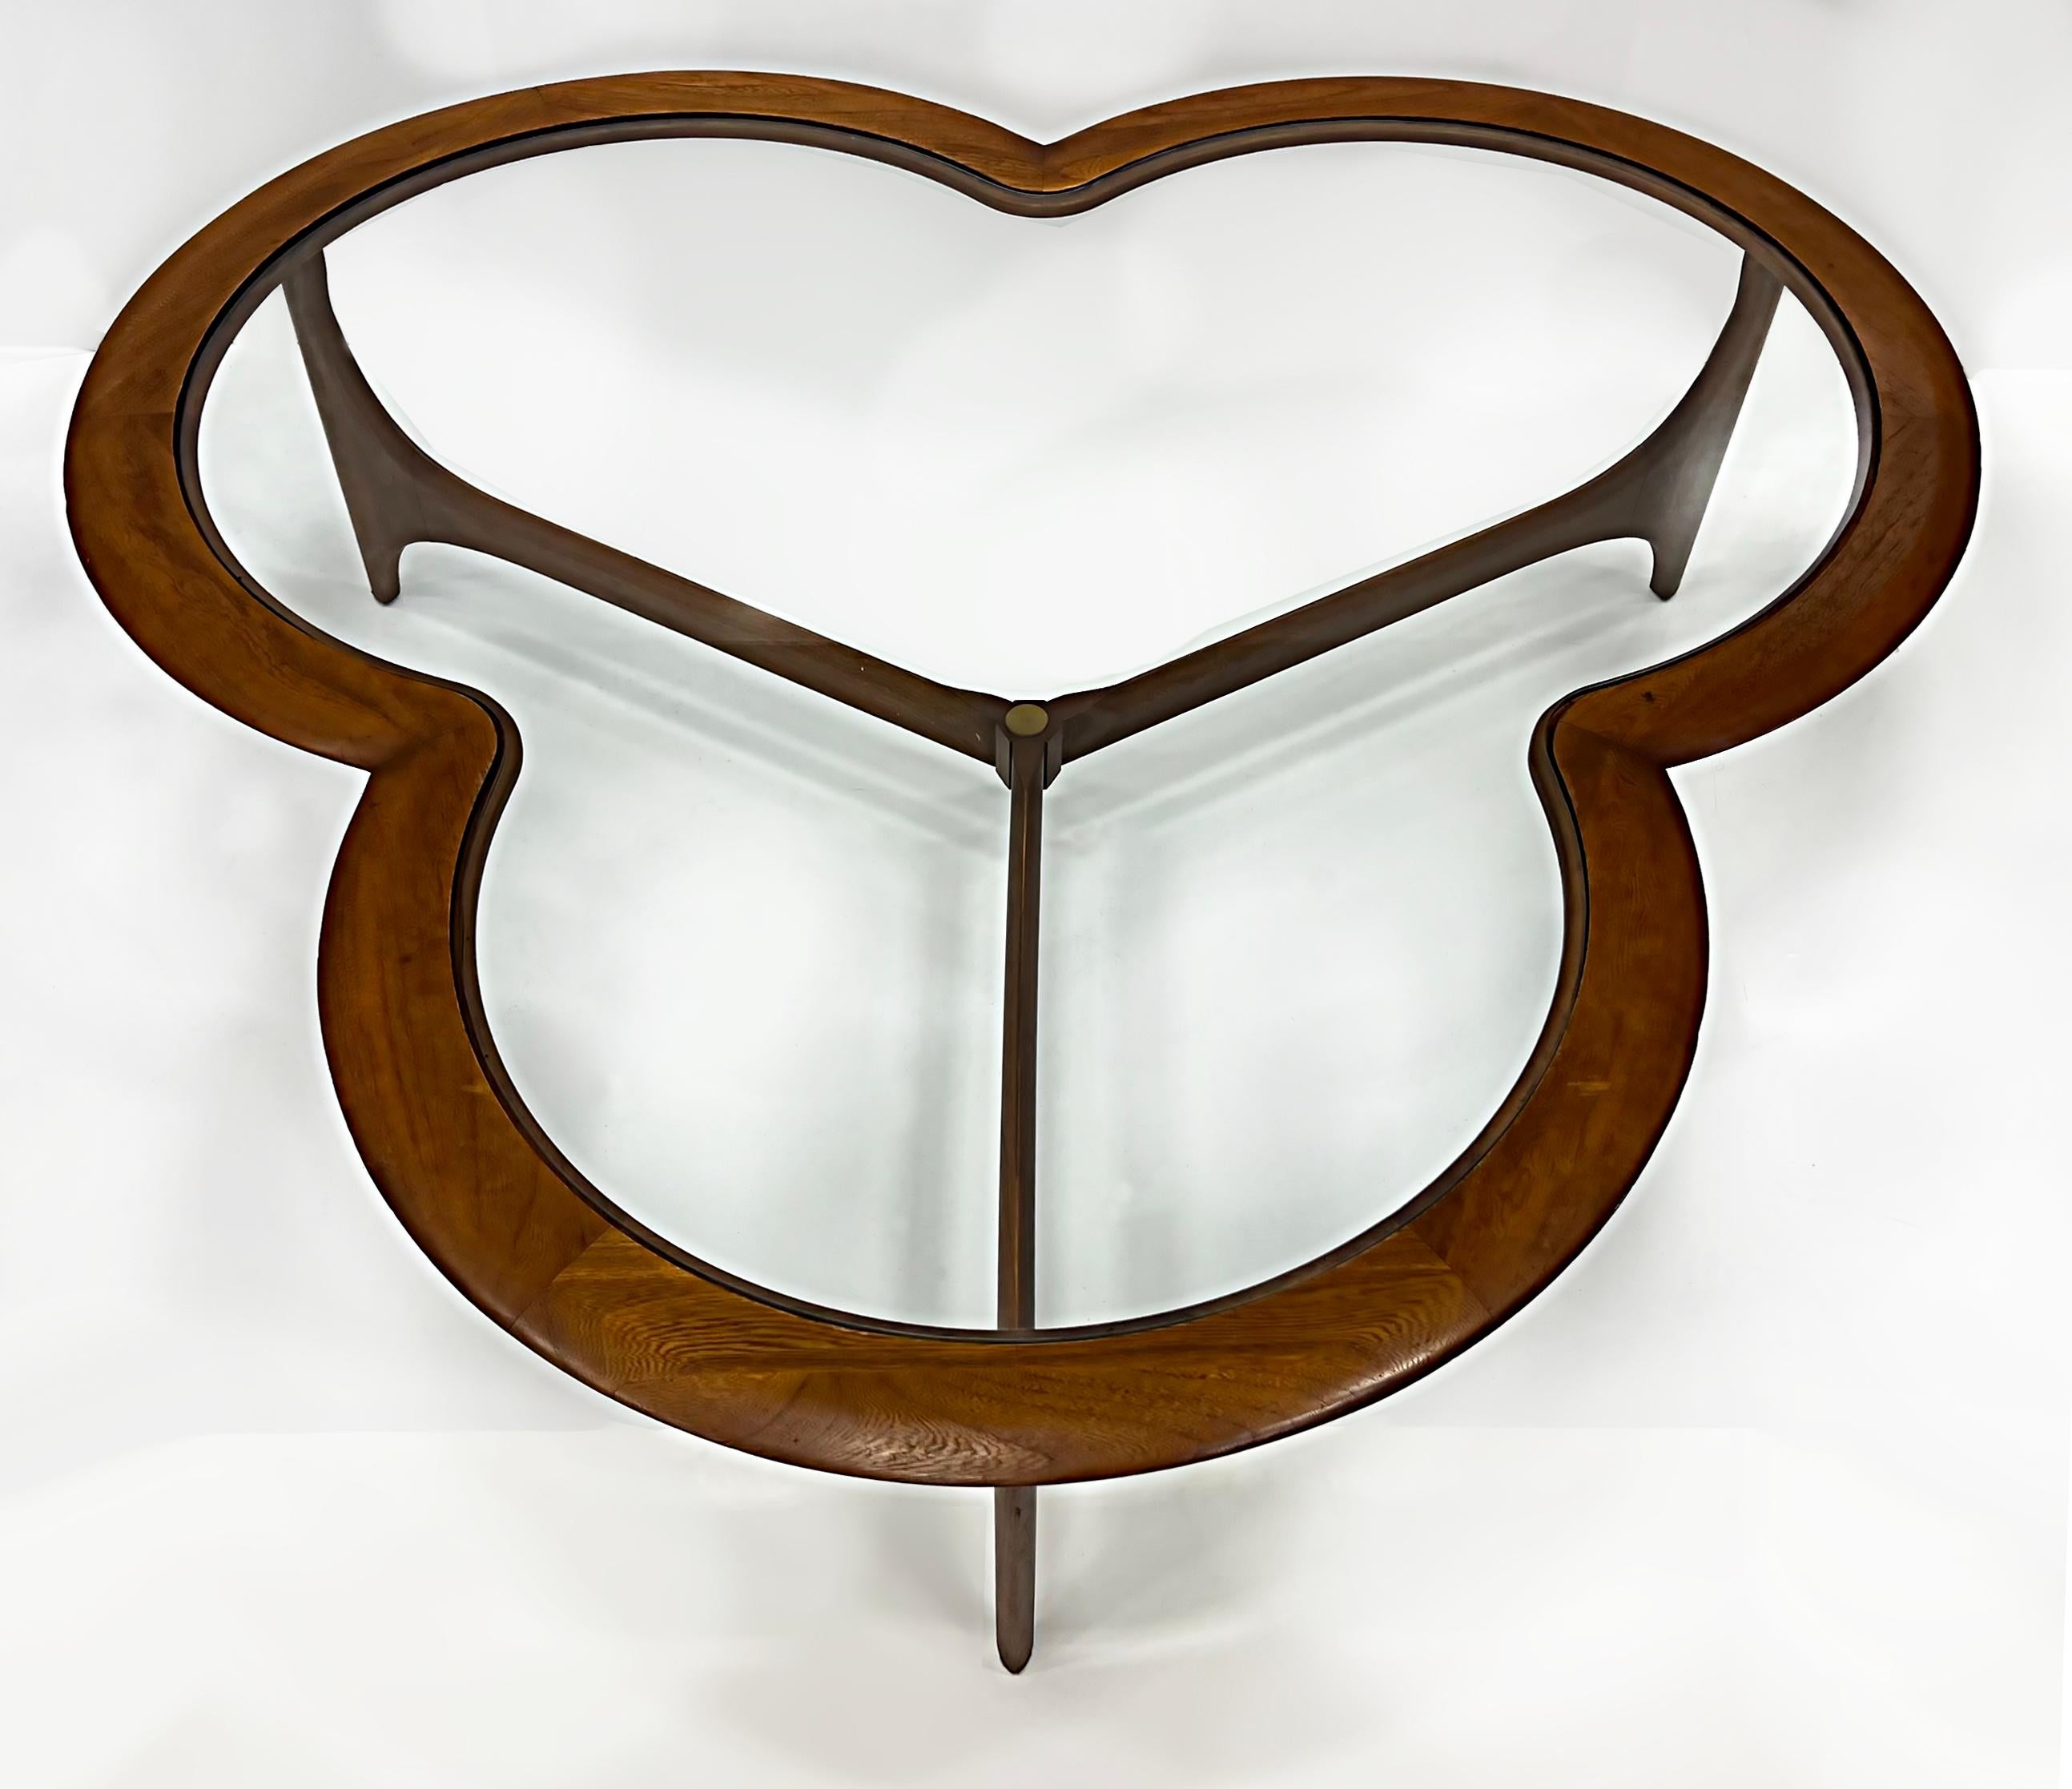 Midcentury Lane Walnut Trefoil Clover Leaf Coffee Table with Glass 1